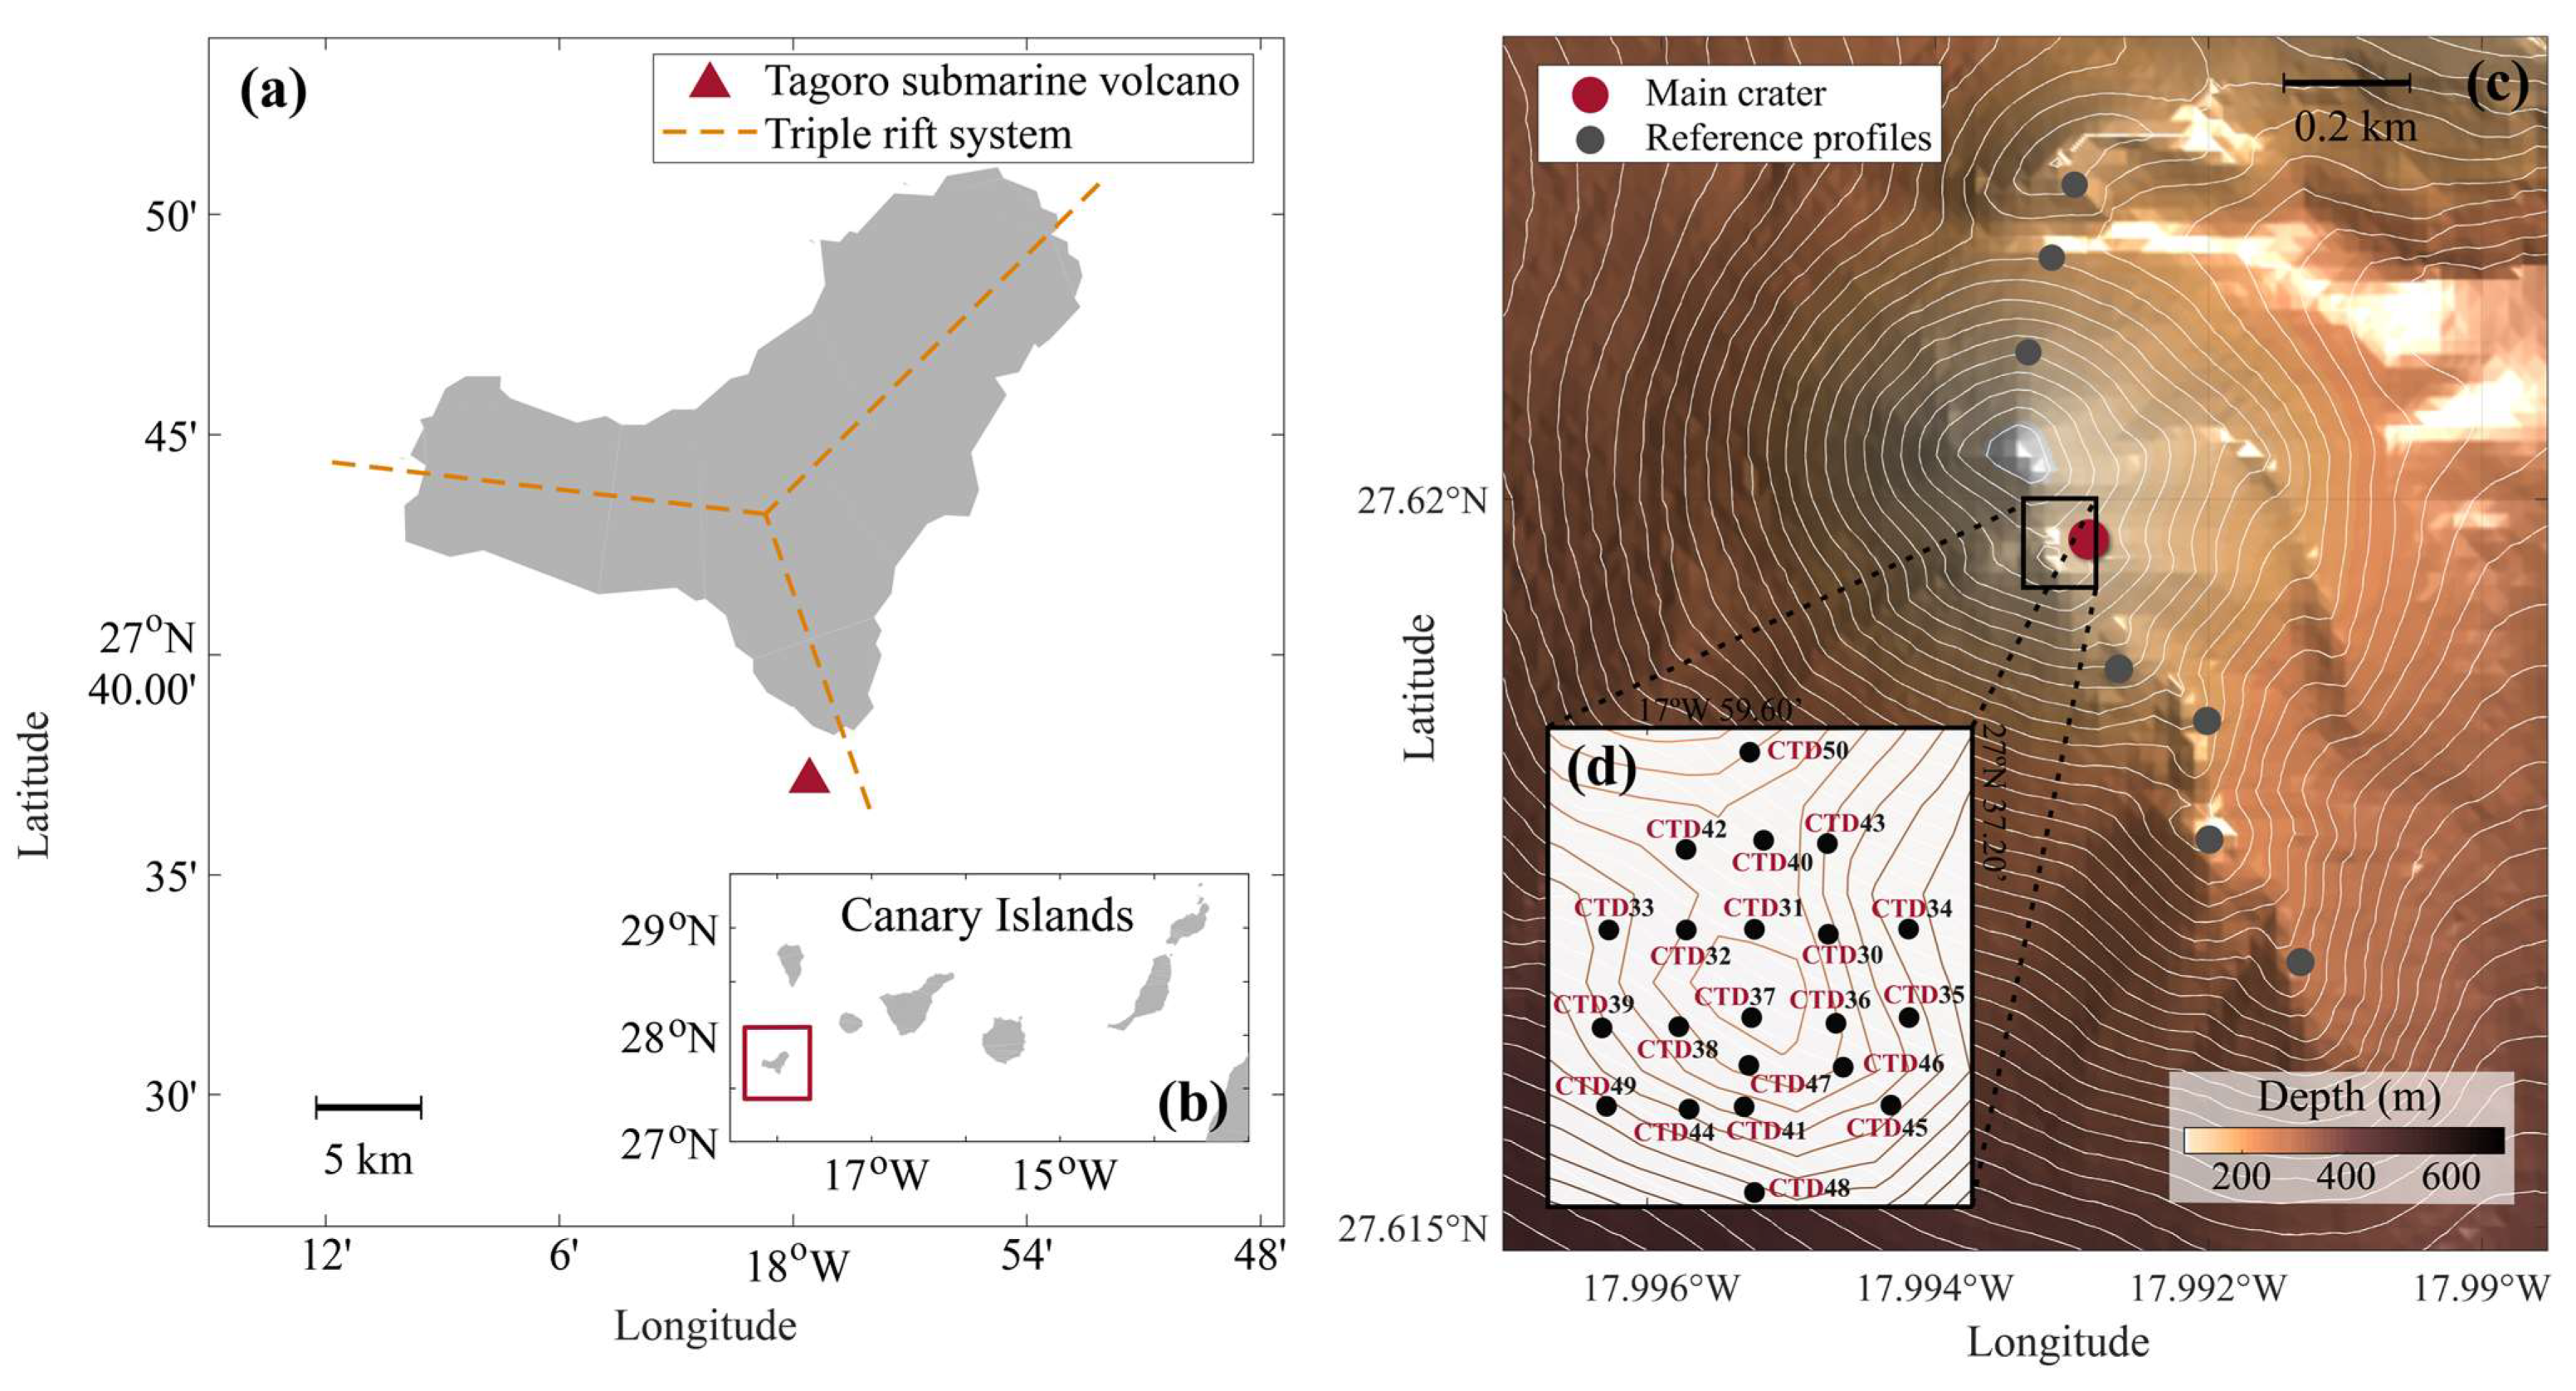 Geosciences | Free Full-Text | Analysis of Volcanic Thermohaline  Fluctuations of Tagoro Submarine Volcano (El Hierro Island, Canary Islands,  Spain)